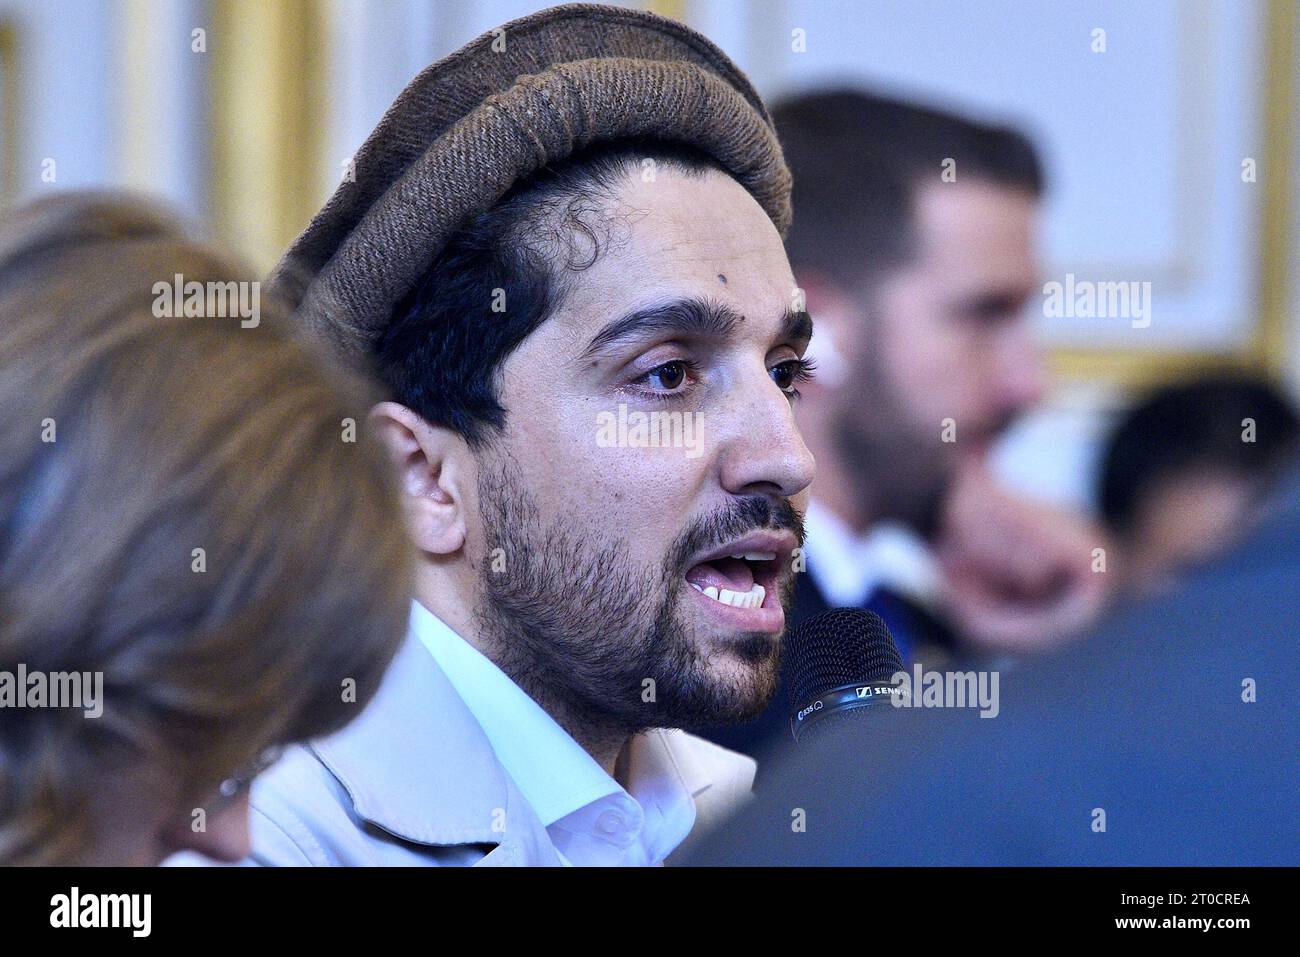 Ahmad Massoud, Afghan soldier and politician, son of Commander Ahmed Shah Massoud of Afghanistan's Panchir province, spent a day in Strasbourg as part of the Ideal Libraries literary festival. To mark the release of his book 'Our Freedom', Ahmad Massoud recalled his resistance to the Taliban regime. The event was attended by Reza Deghati, the photographer and reporter who shot the portrait of Commander Massoud in 1985, which toured the world. The faithful also came to support Commander Massoud's son. October 4, 2023, in Strasbourg Northeastern France. Photo by Nicolas Roses/ABACAPRESS.COM Stock Photo